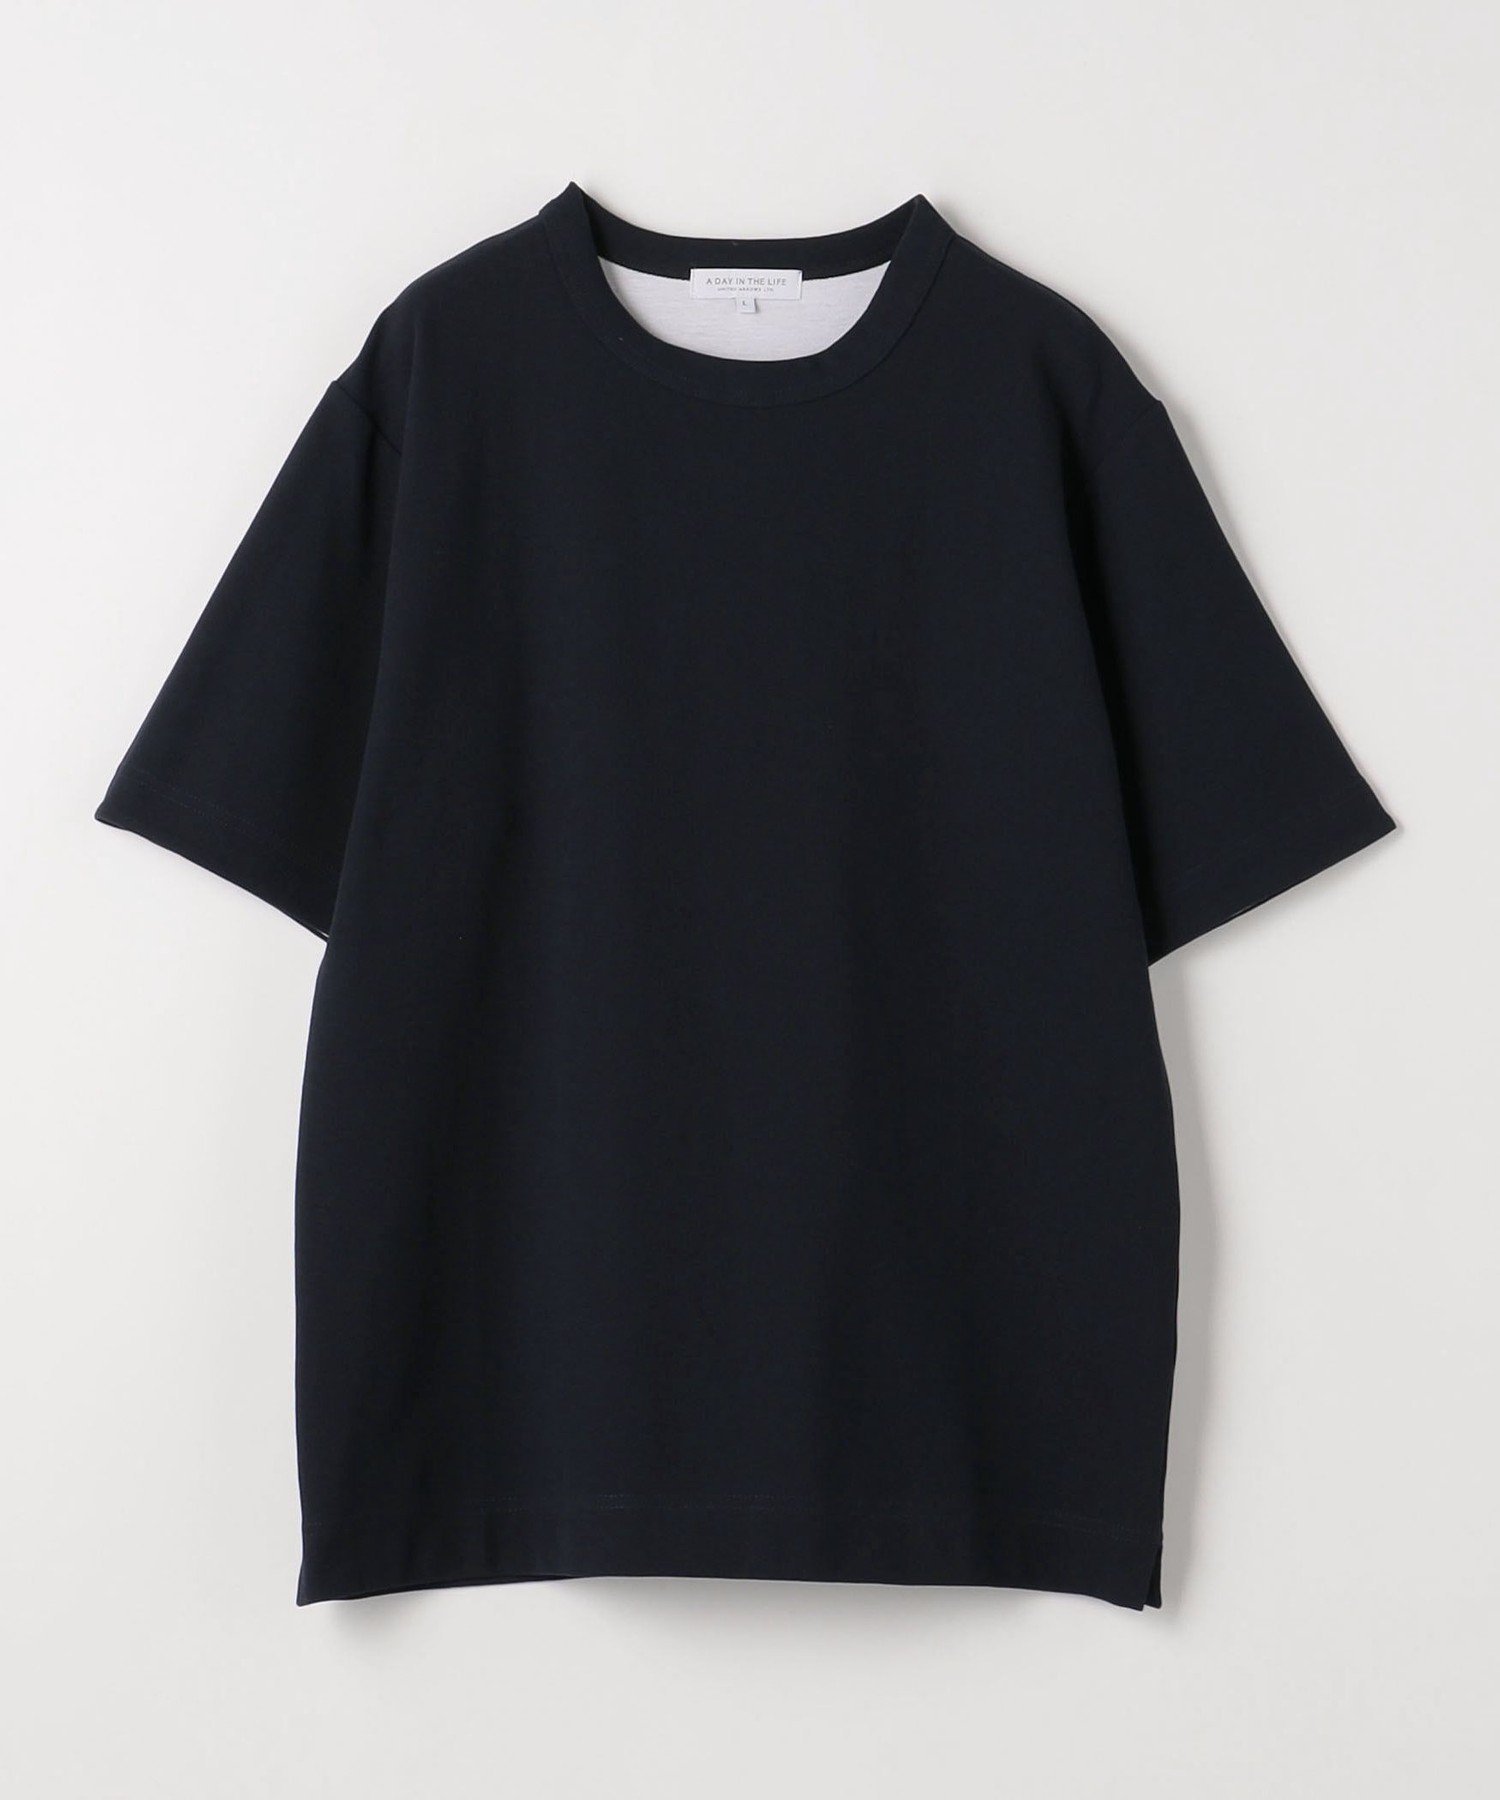 【SALE／50%OFF】a day in the life サーフニット BIG Tシャツ＜A DAY IN THE LIFE＞ ユナイテッドアローズ アウトレット トップス カットソー・Tシャツ ネイビー ホワイト オレンジ